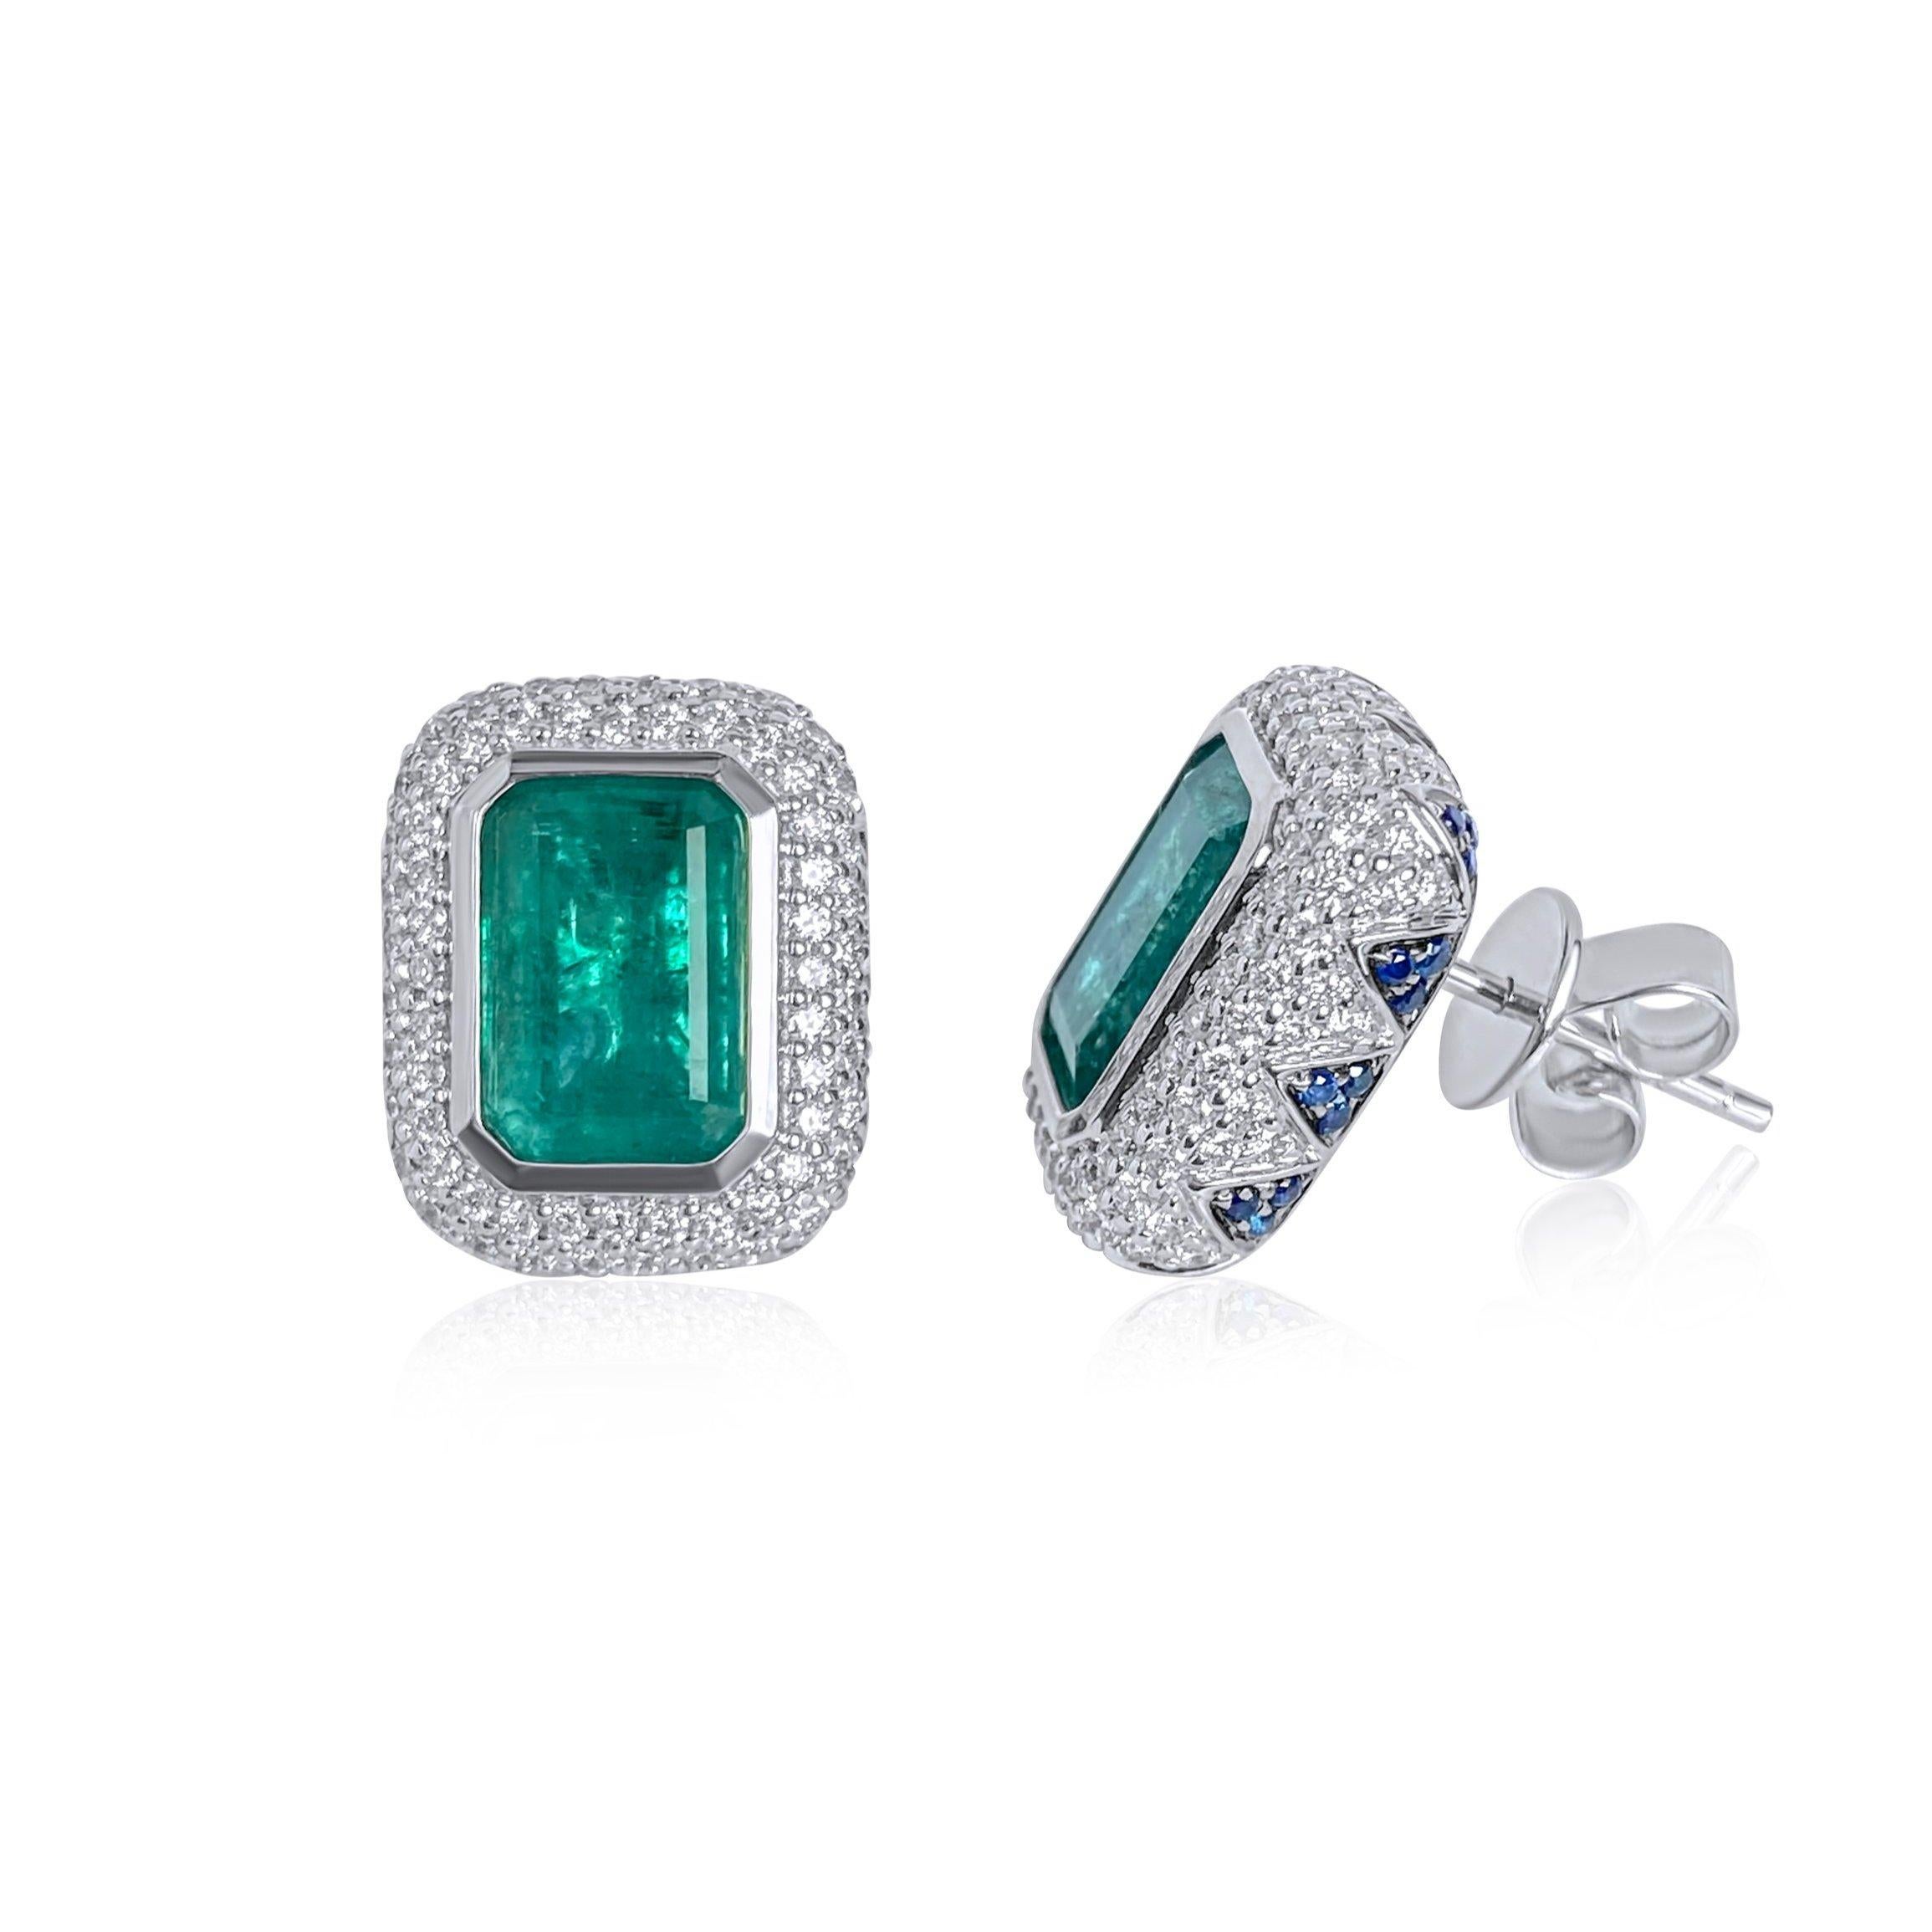 Almost 5.5 ctw Emerald Rectangular cut set in RiNoor’s iconic Lotus motif setting in 14k white gold. Part of RiNoor’s Lotus collection comprising of rings, earrings and bracelets, the Lotus collection is a customer favorite. Explore all the color